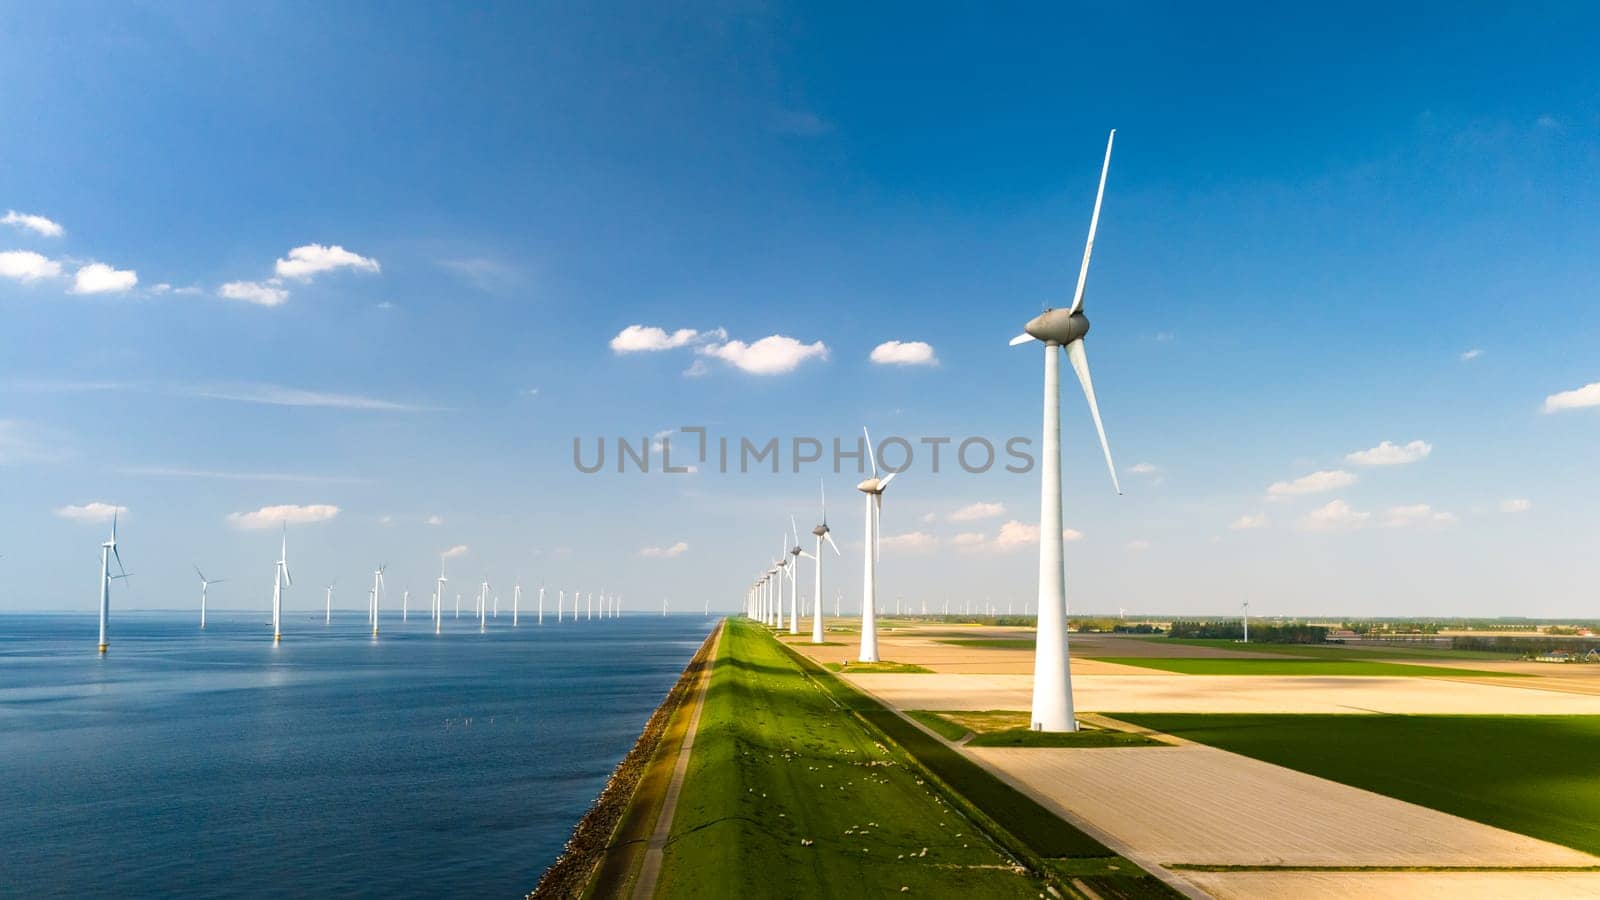 A row of towering wind turbines gracefully spin with the breeze next to a tranquil body of water in the Netherlands Flevoland region. Energy transition in Europe